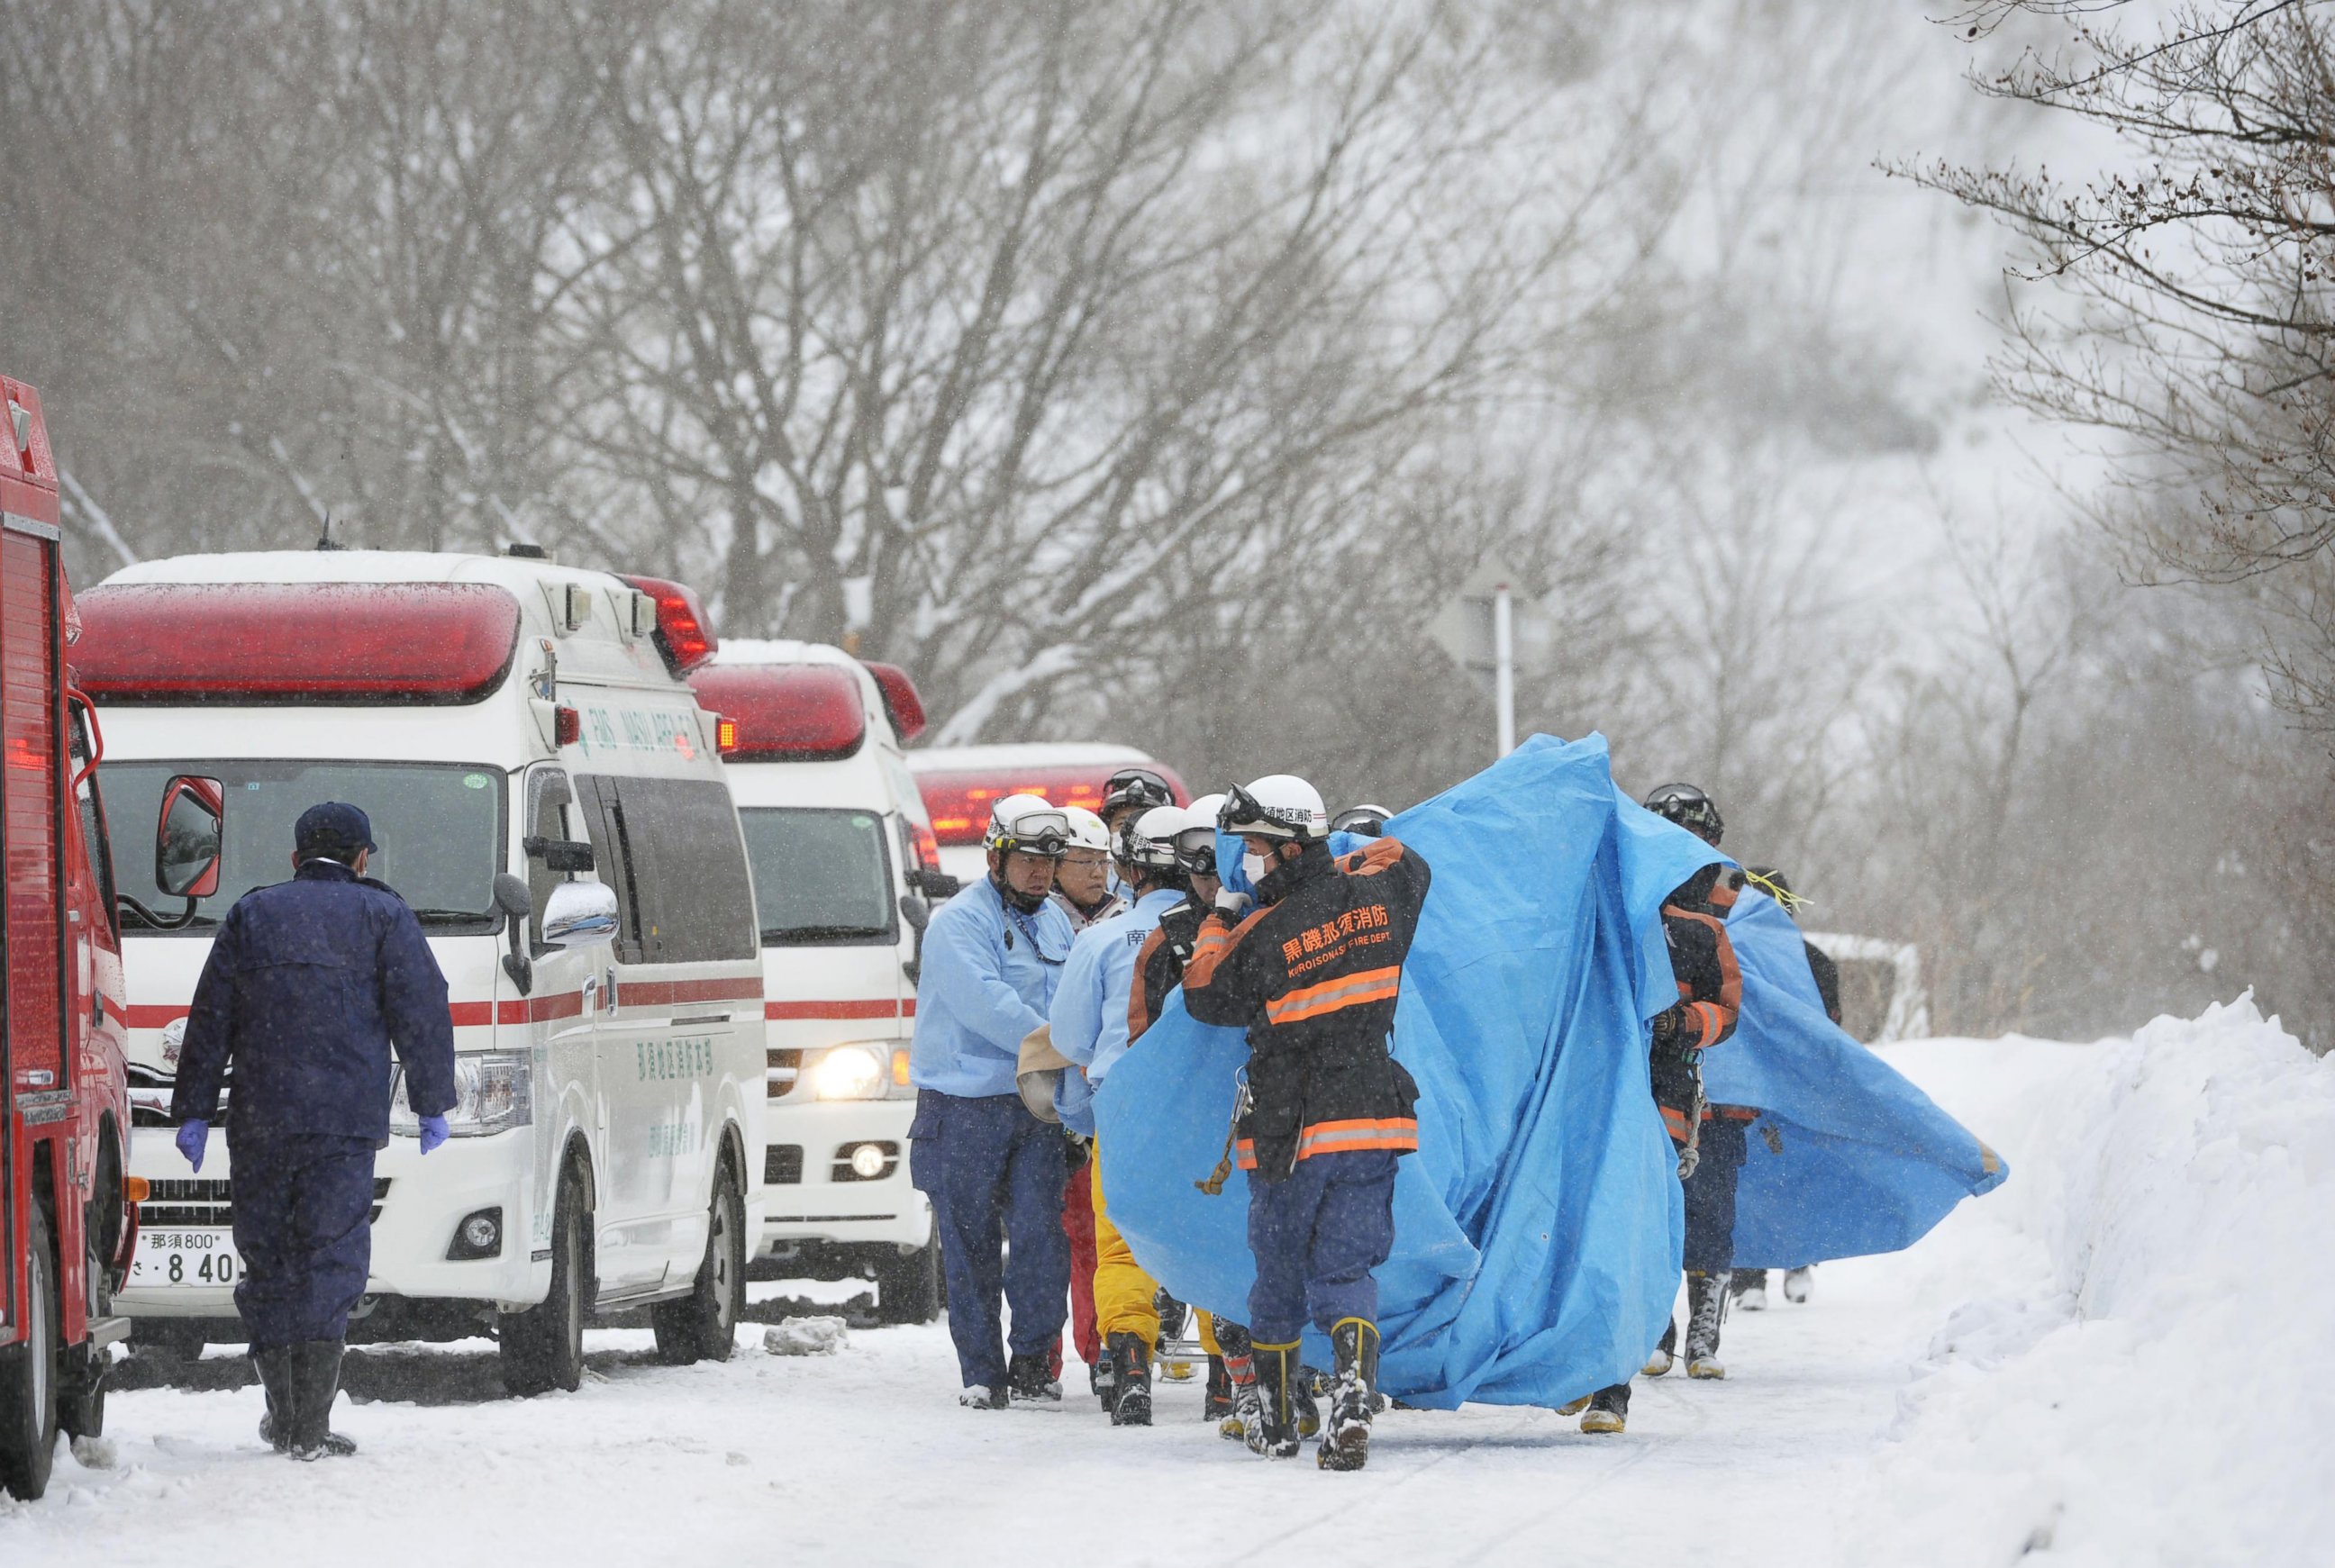 PHOTO: Rescuers carry people injured in an avalanche near a ski slope north of Tokyo, Japan, March 27, 2017. 